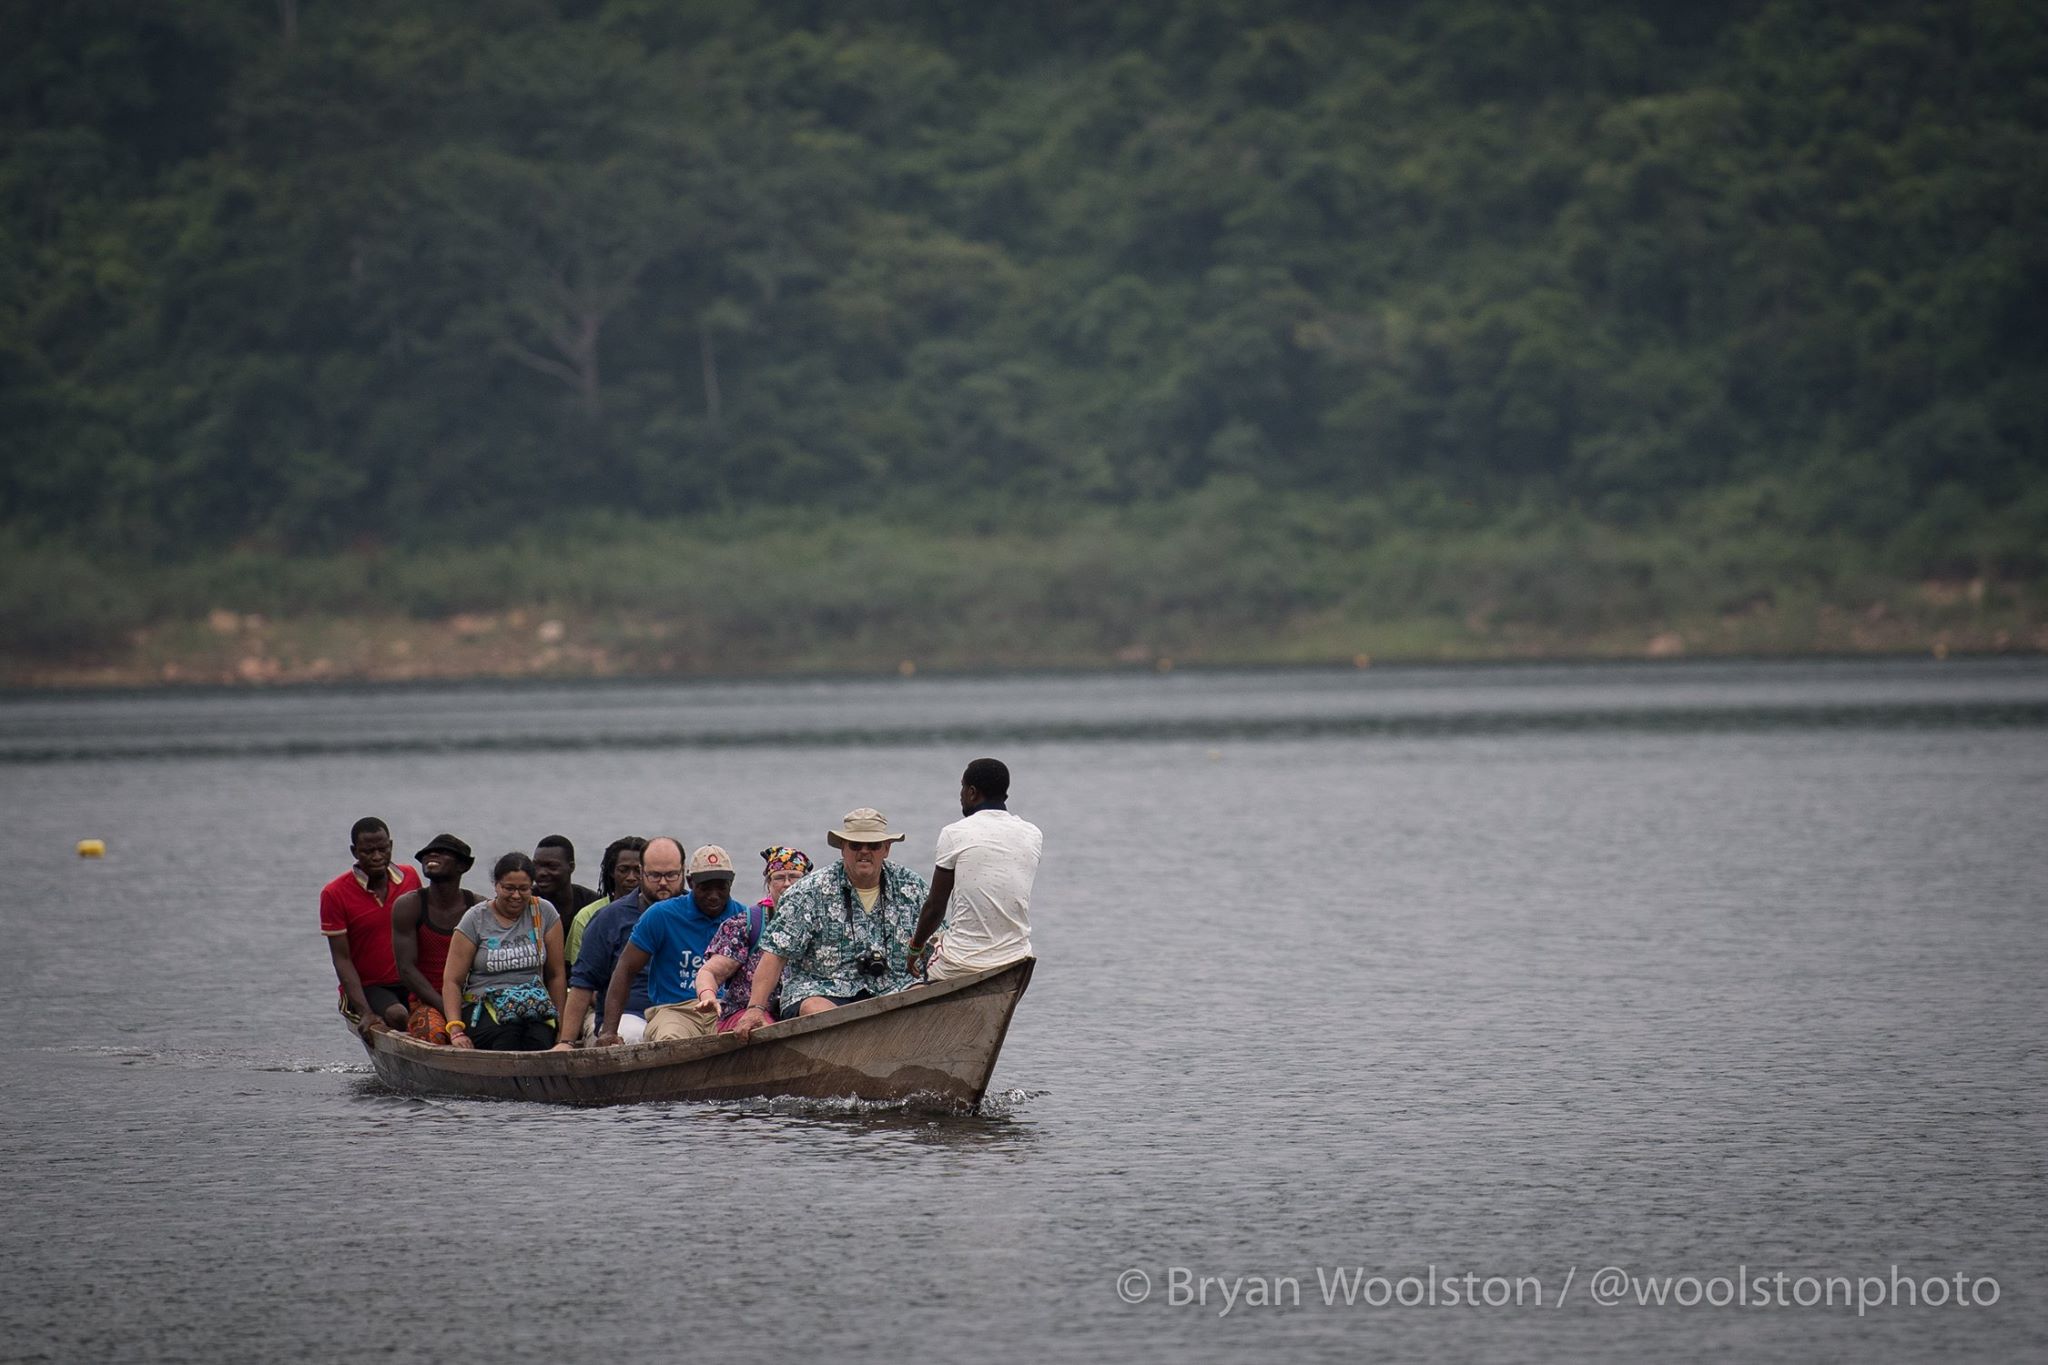 A group photo of bunch of people riding a boat